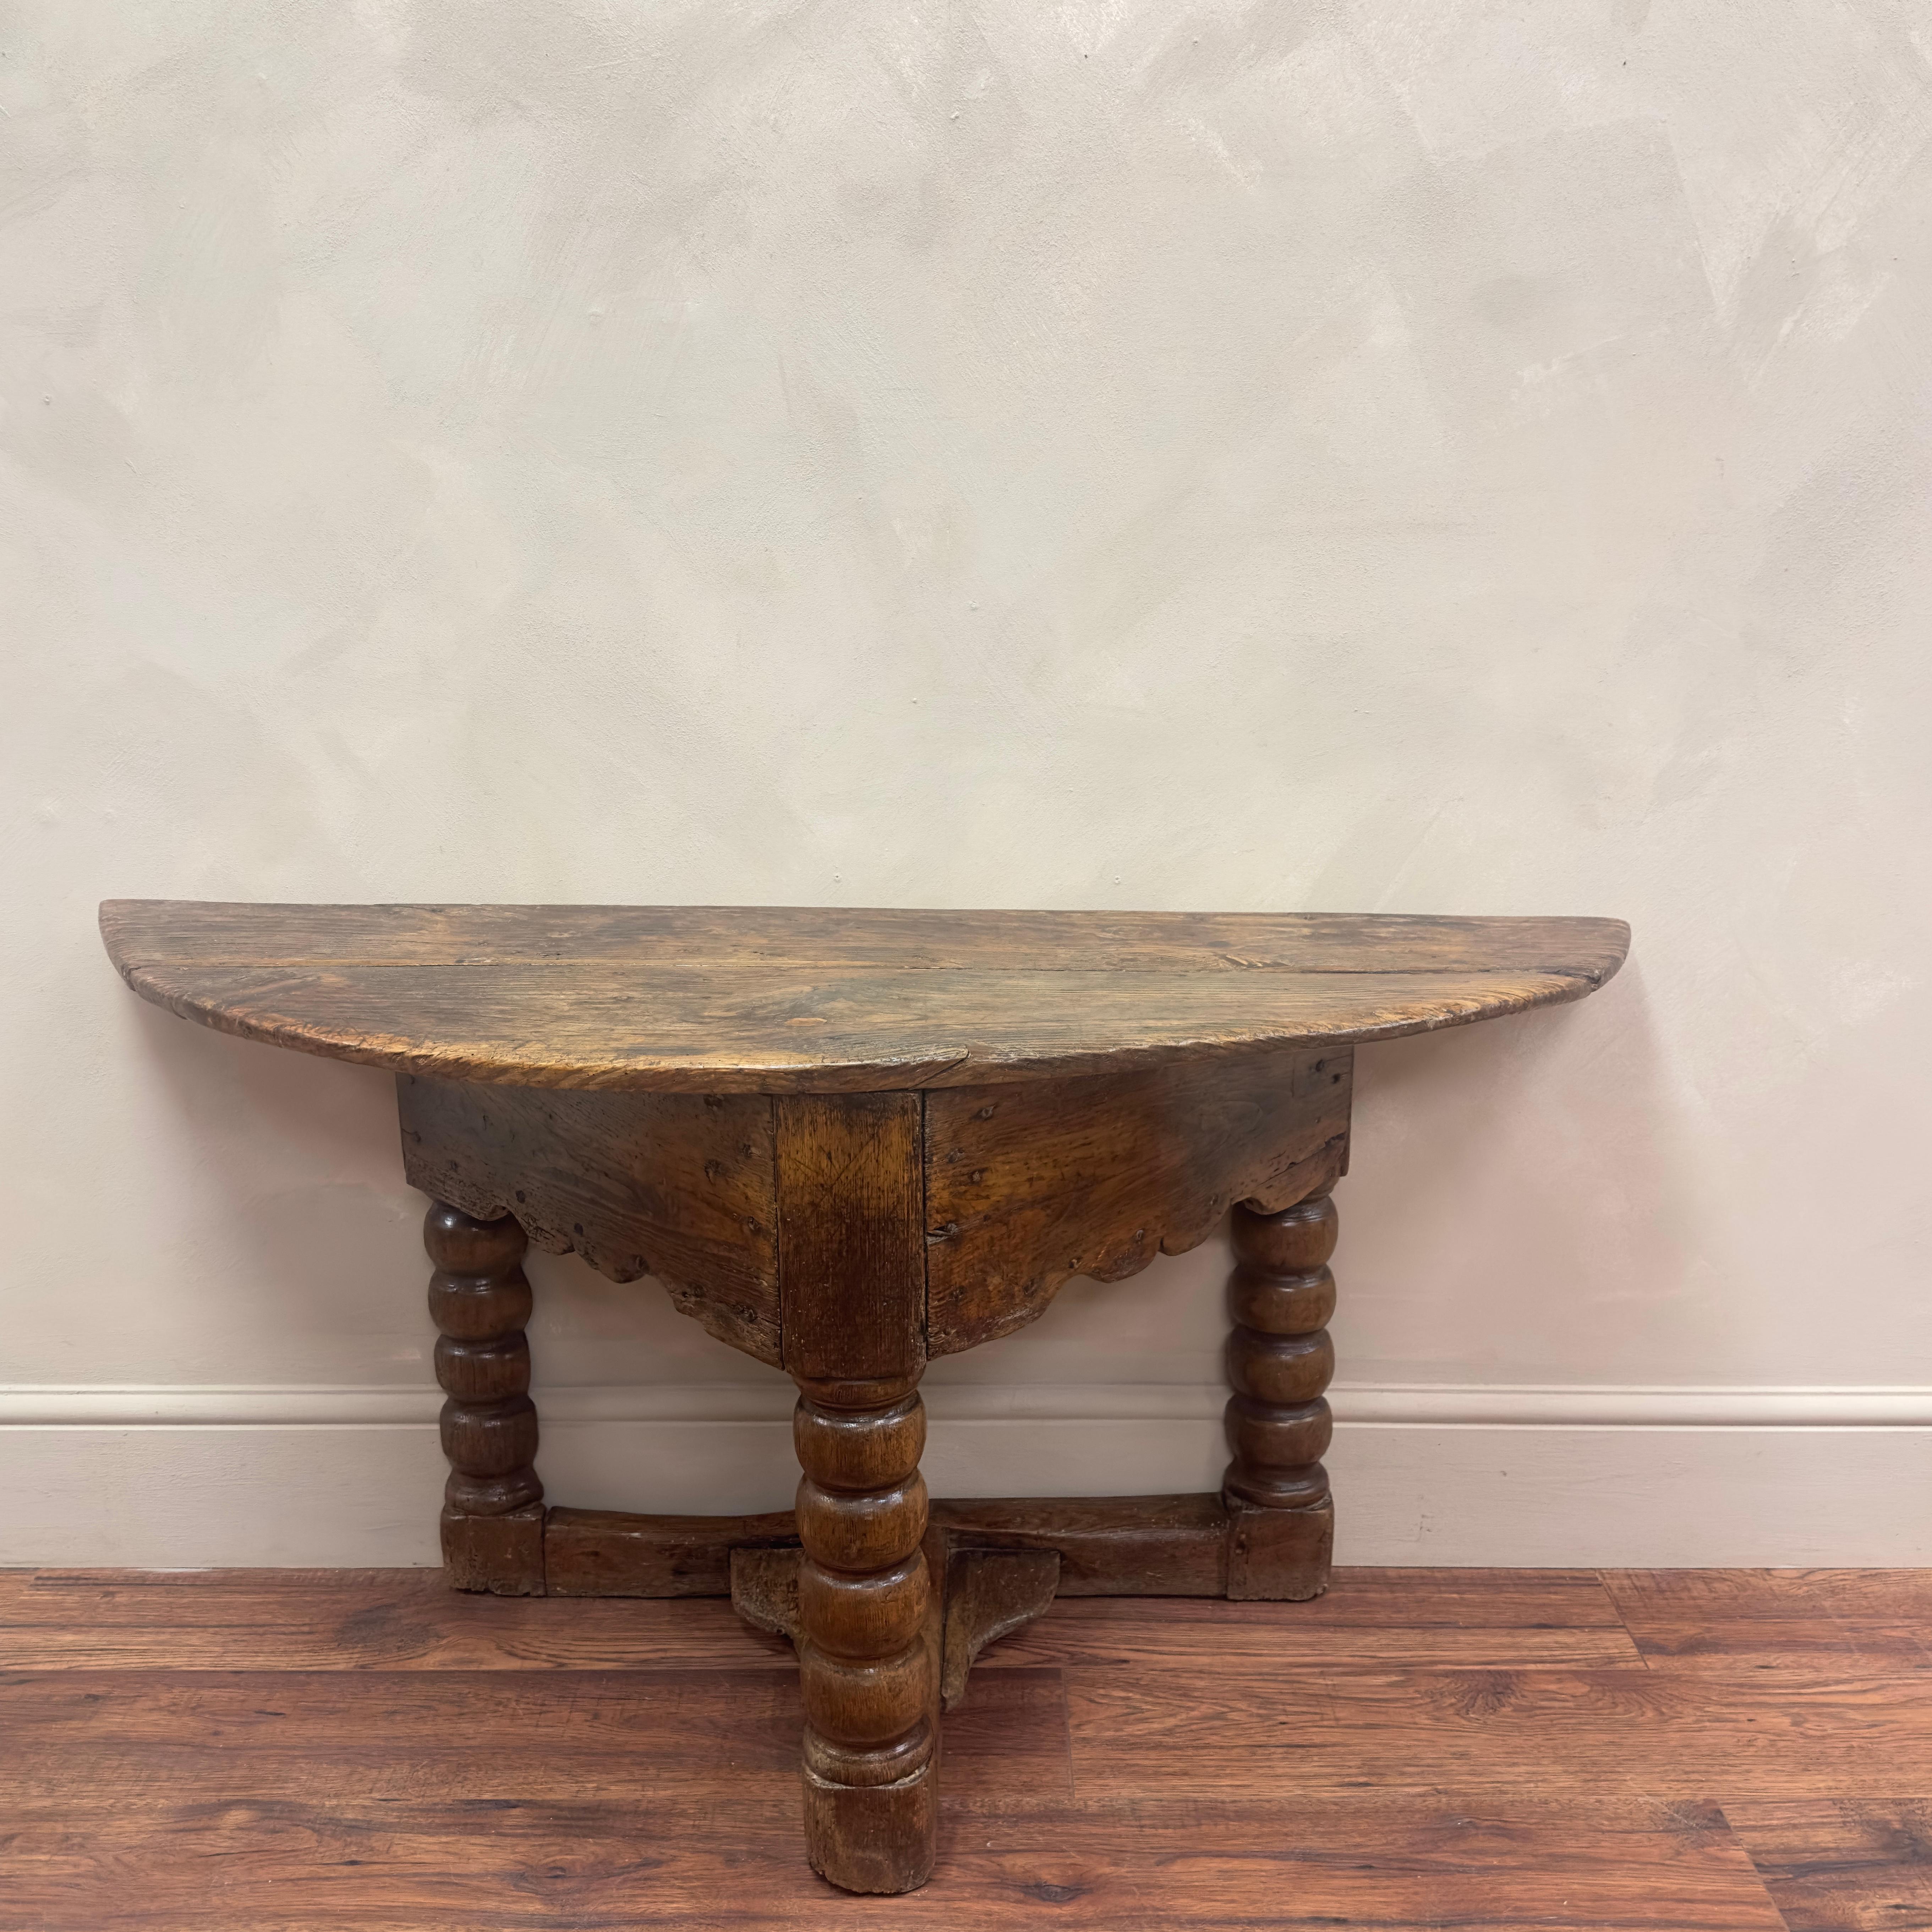 This wonderful demi lune console table was purchased privately and has been in the same house for many years.
Constructed from elm and oak, with the use of rosehead nails, the time worn wood has wonderful wear and colouration.
The shallow depth